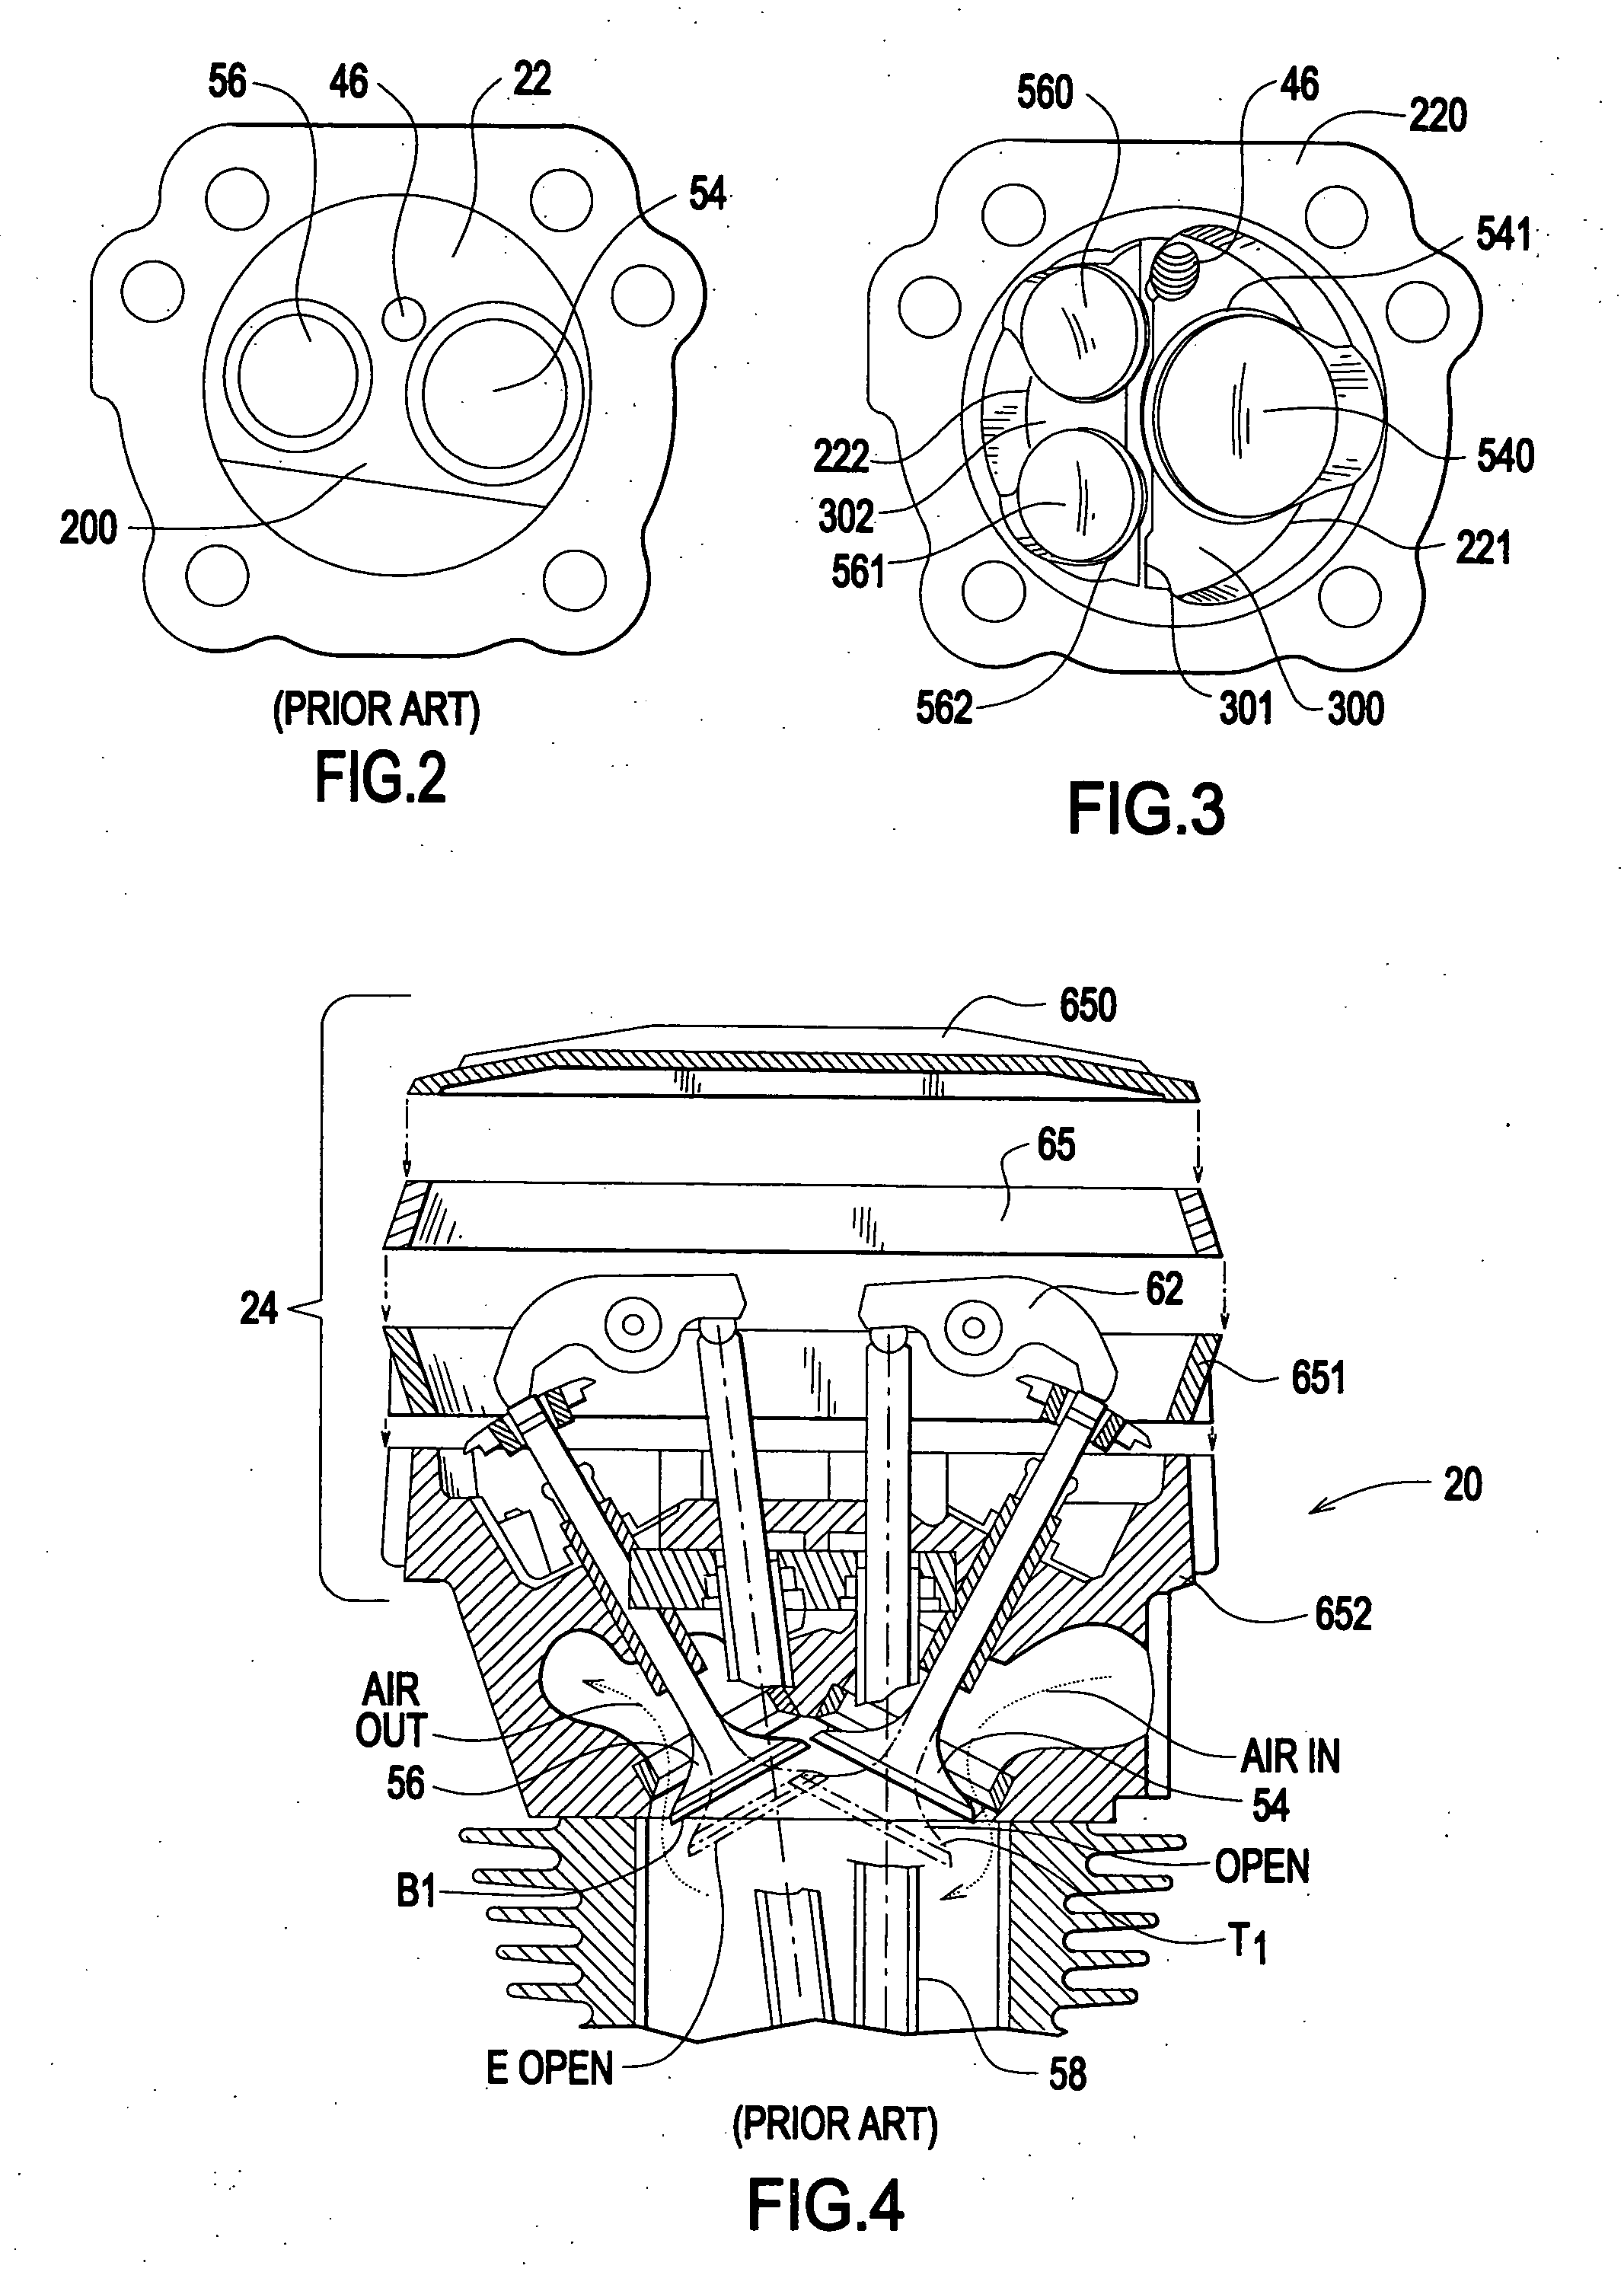 Concave combustion chamber